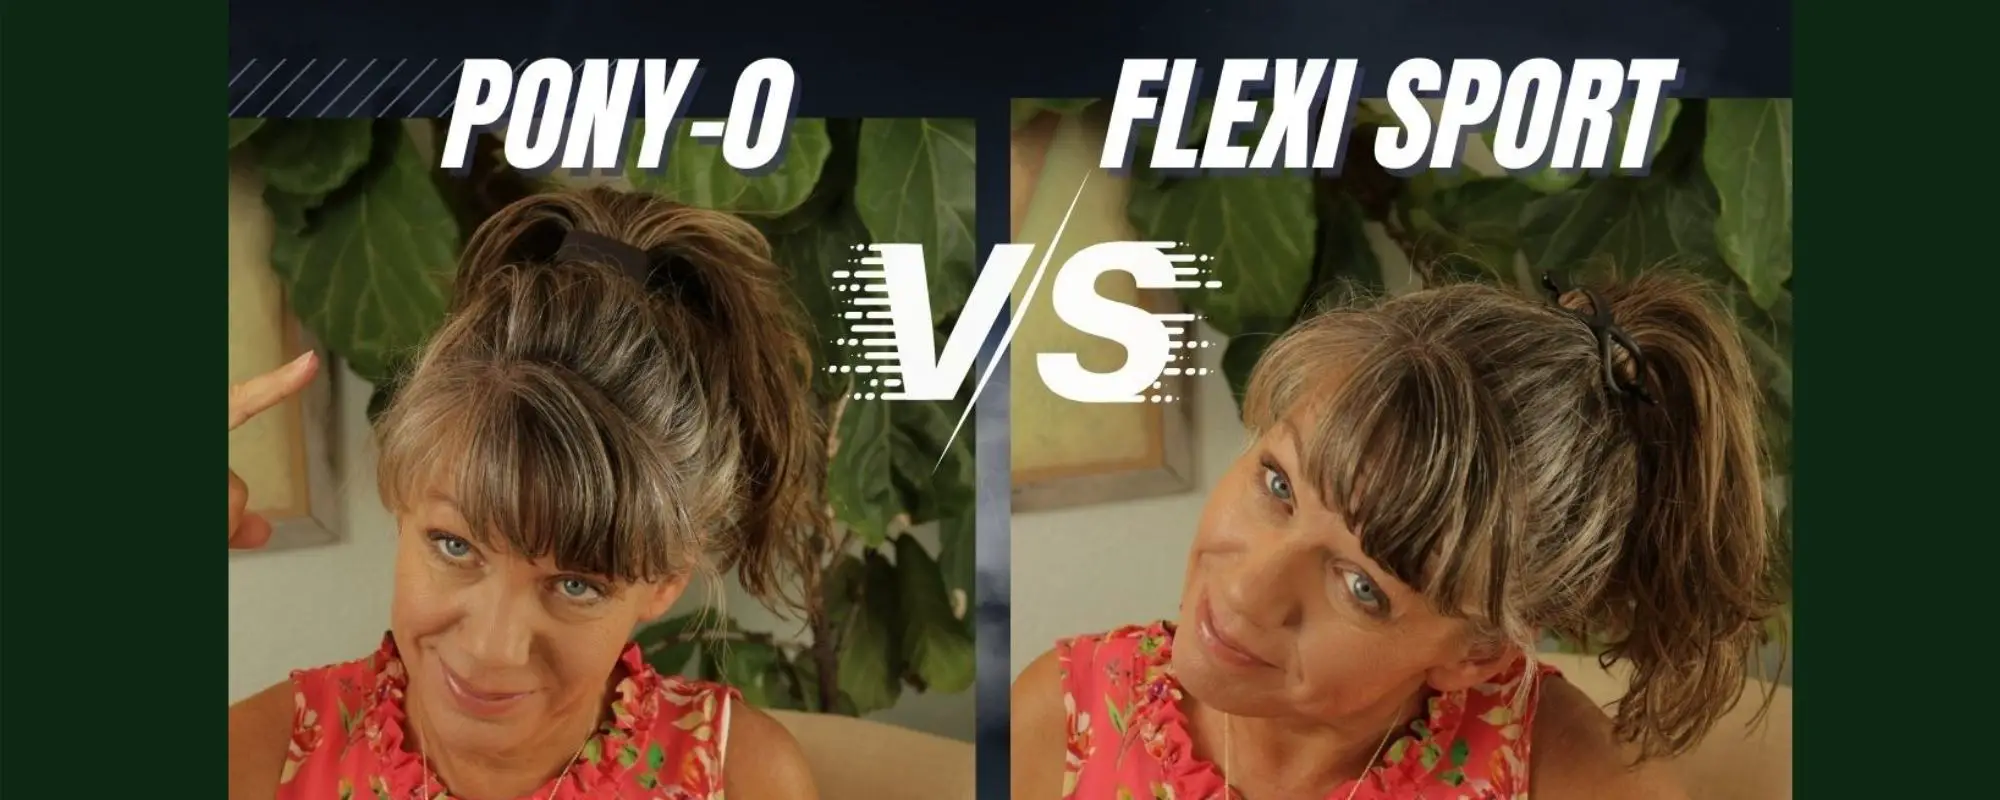 Pony-O vs. Flexi Sport [Could this be the best Pony-O Alternative?] -  Beautiful Life